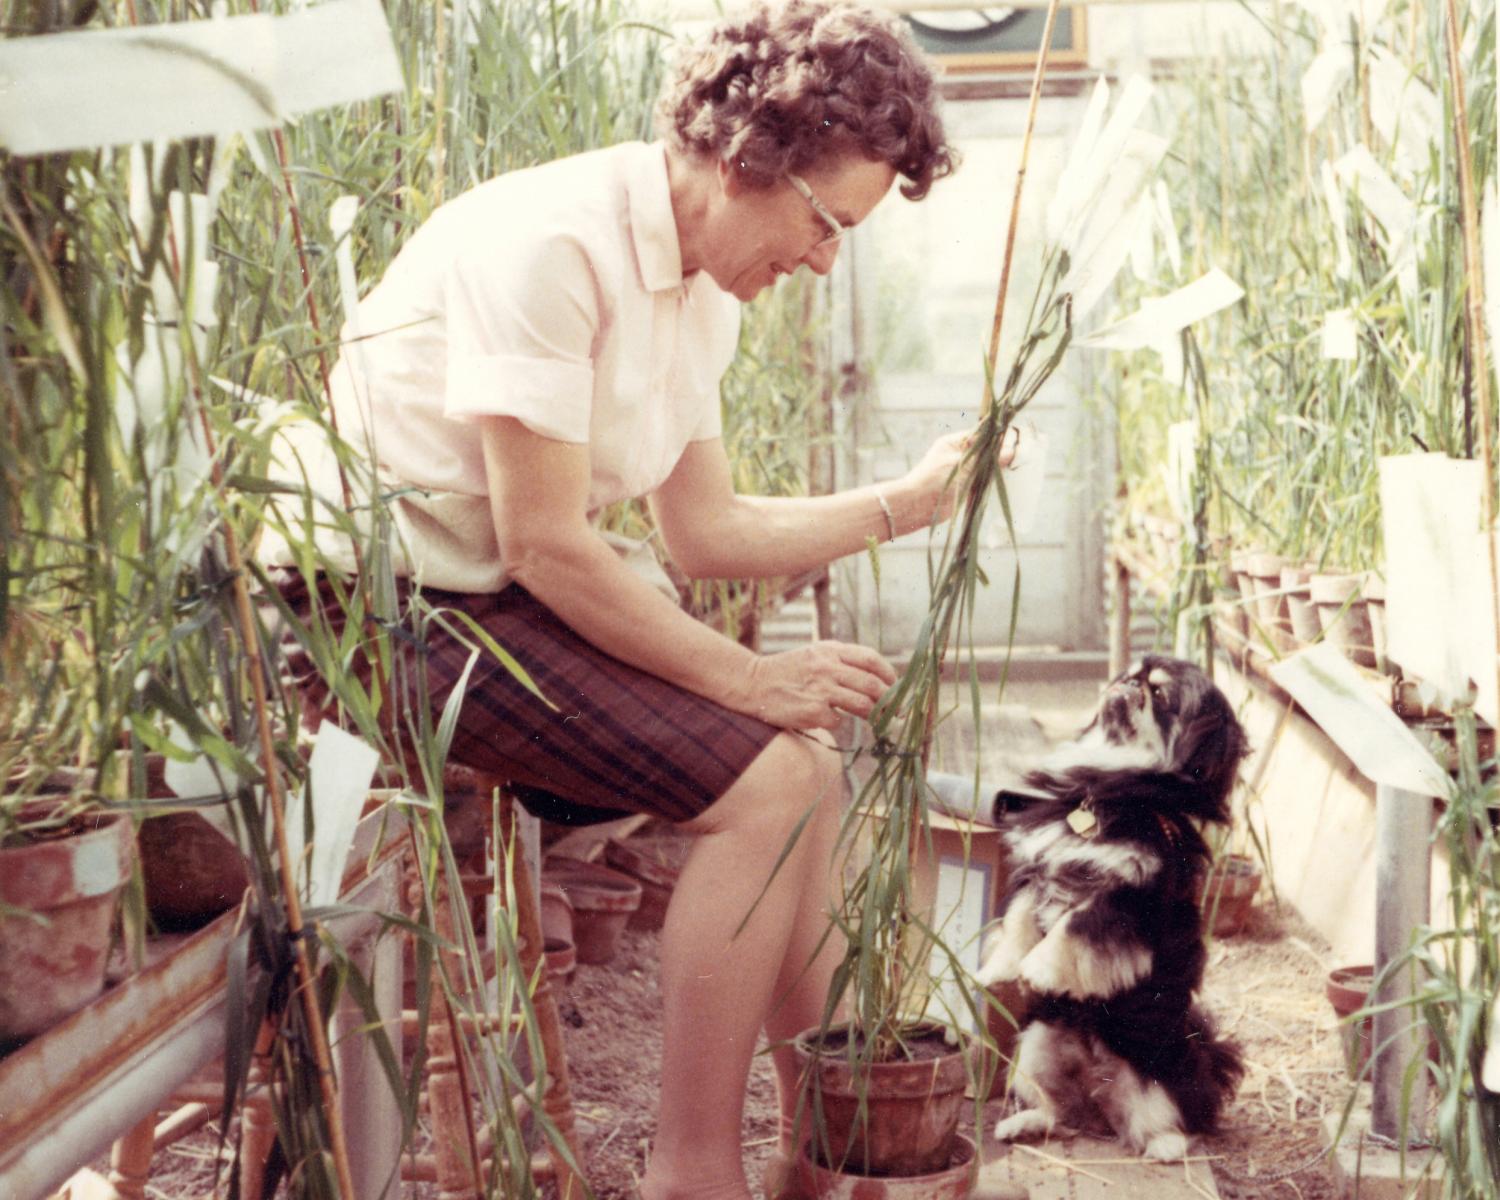 Rosalind Morris examines her wheat research in the agronomy greenhouse on East Campus, with her dog, circa 1968.